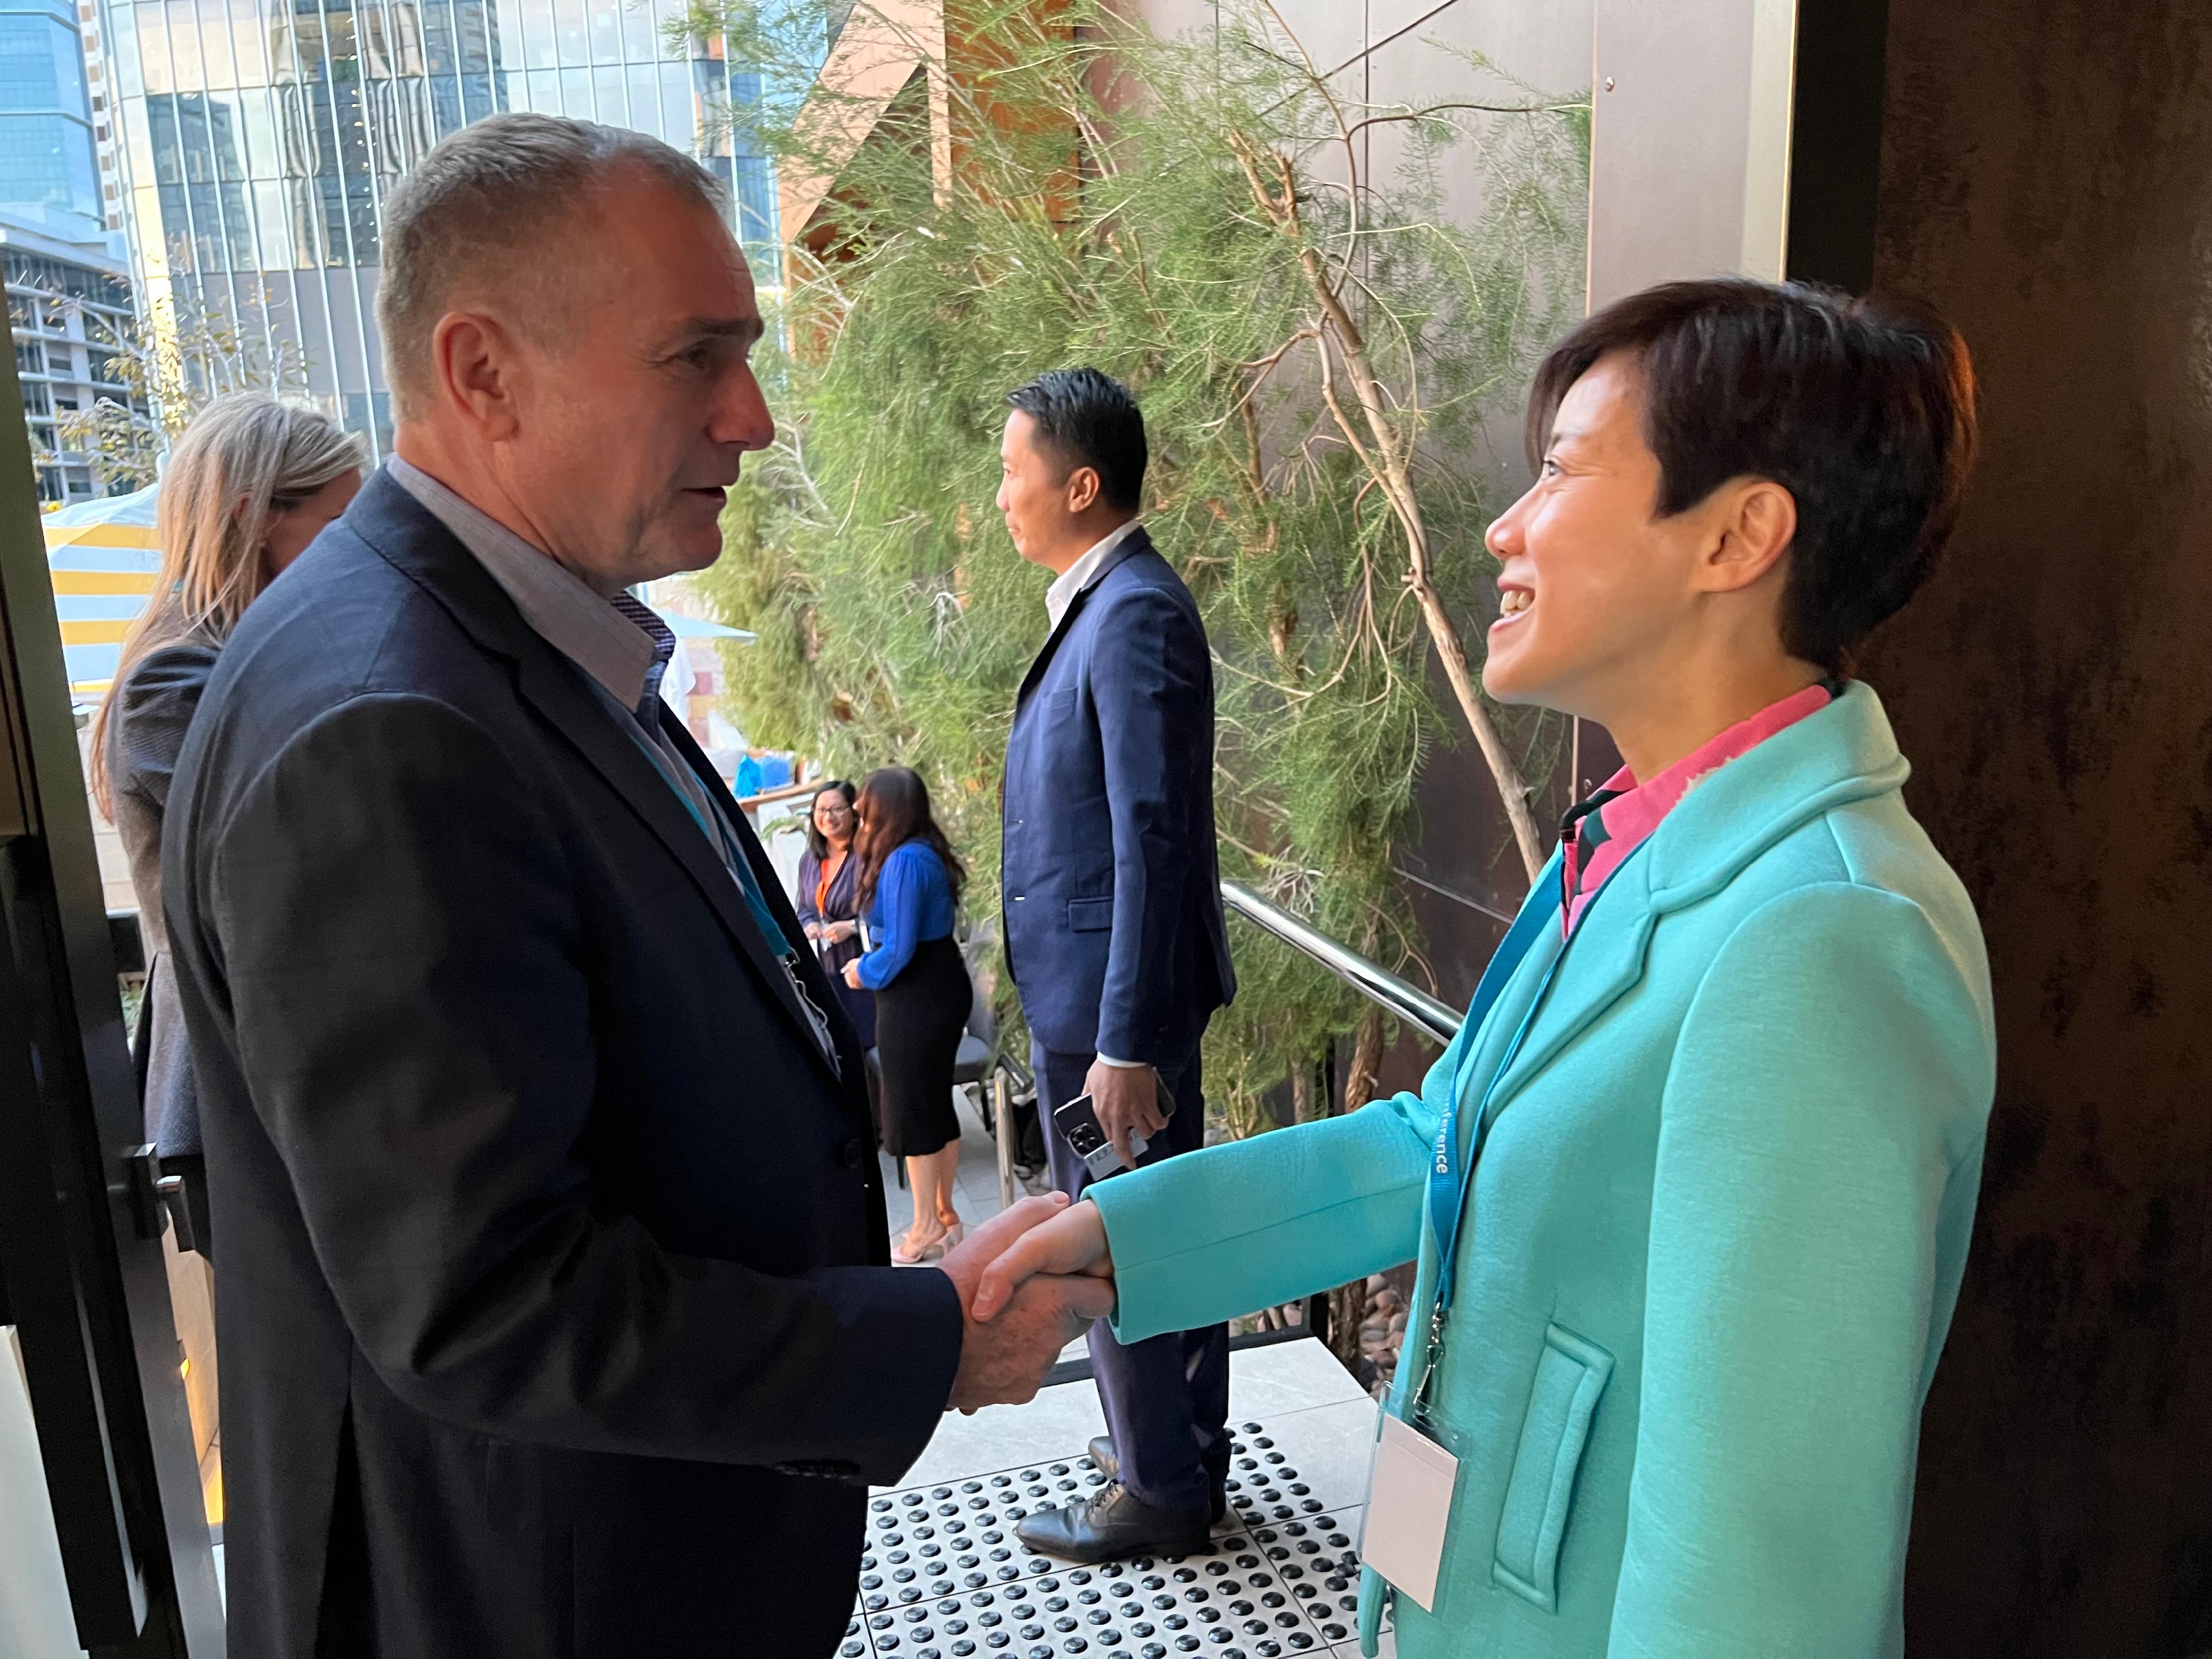 The Commissioner of Customs and Excise, Ms Louise Ho (right), from May 28 to 31, led a delegation to attend the 24th World Customs Organization (WCO) Asia/Pacific Regional Heads of Customs Administrations Conference in Perth, Australia. Photo shows the incumbent WCO Vice-Chairperson for the Asia/Pacific Region, Mr Michael Outram (left), welcoming Ms Ho at a reception.